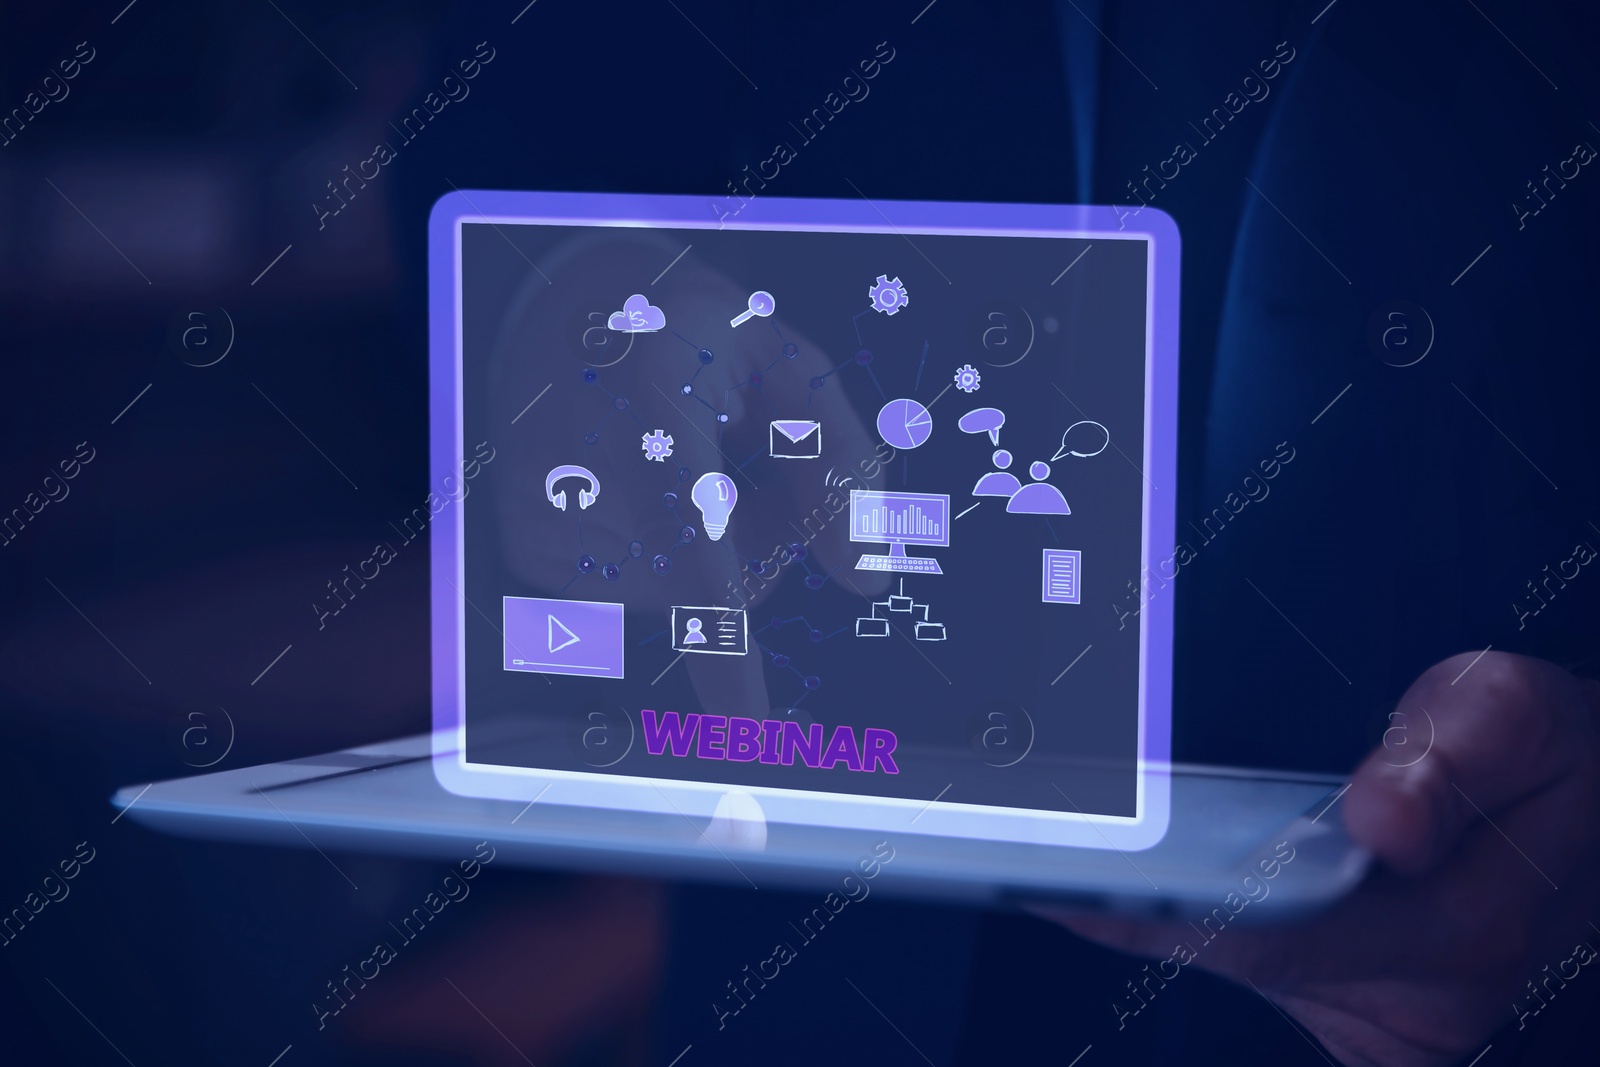 Image of Webinar. Man holding tablet, closeup. Virtual screen with icons over computer